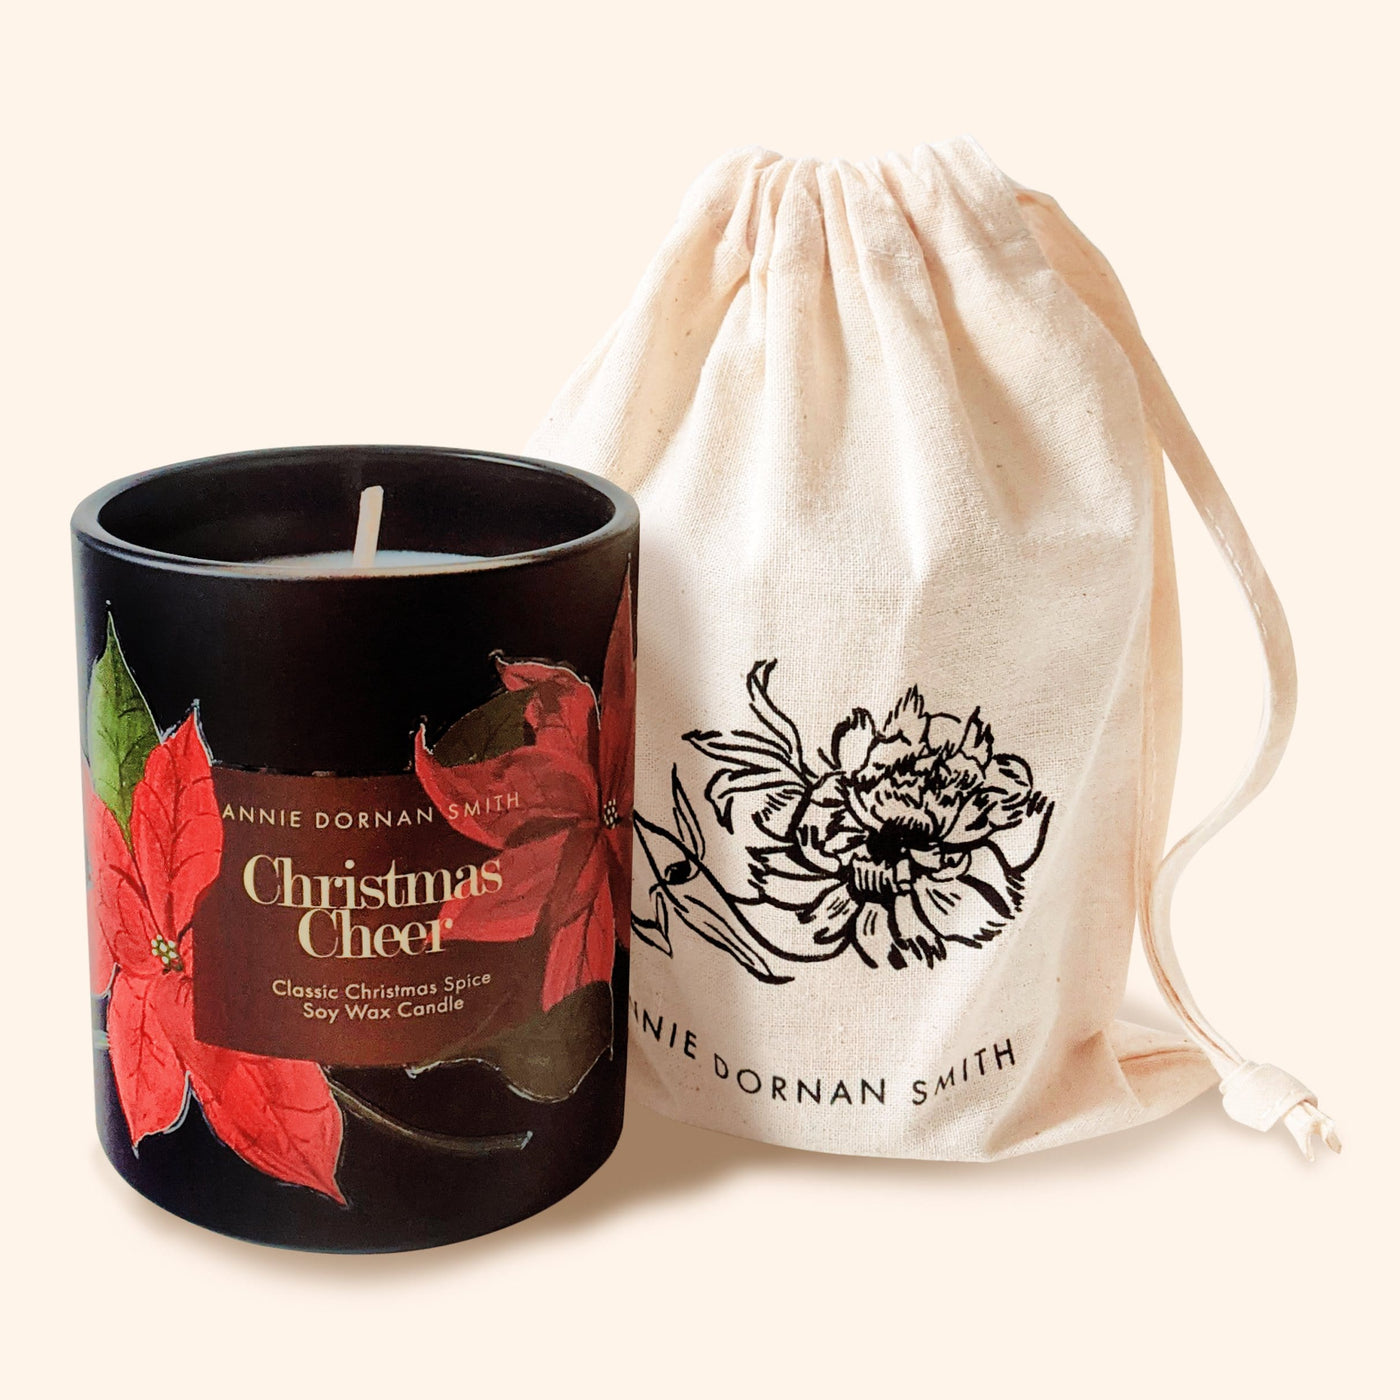 A Black Glass Candle Decorated with Red Poinsettias And A Christmas Cheer Label Alongside Linen Draw String Bag - Annie Dornan Smith